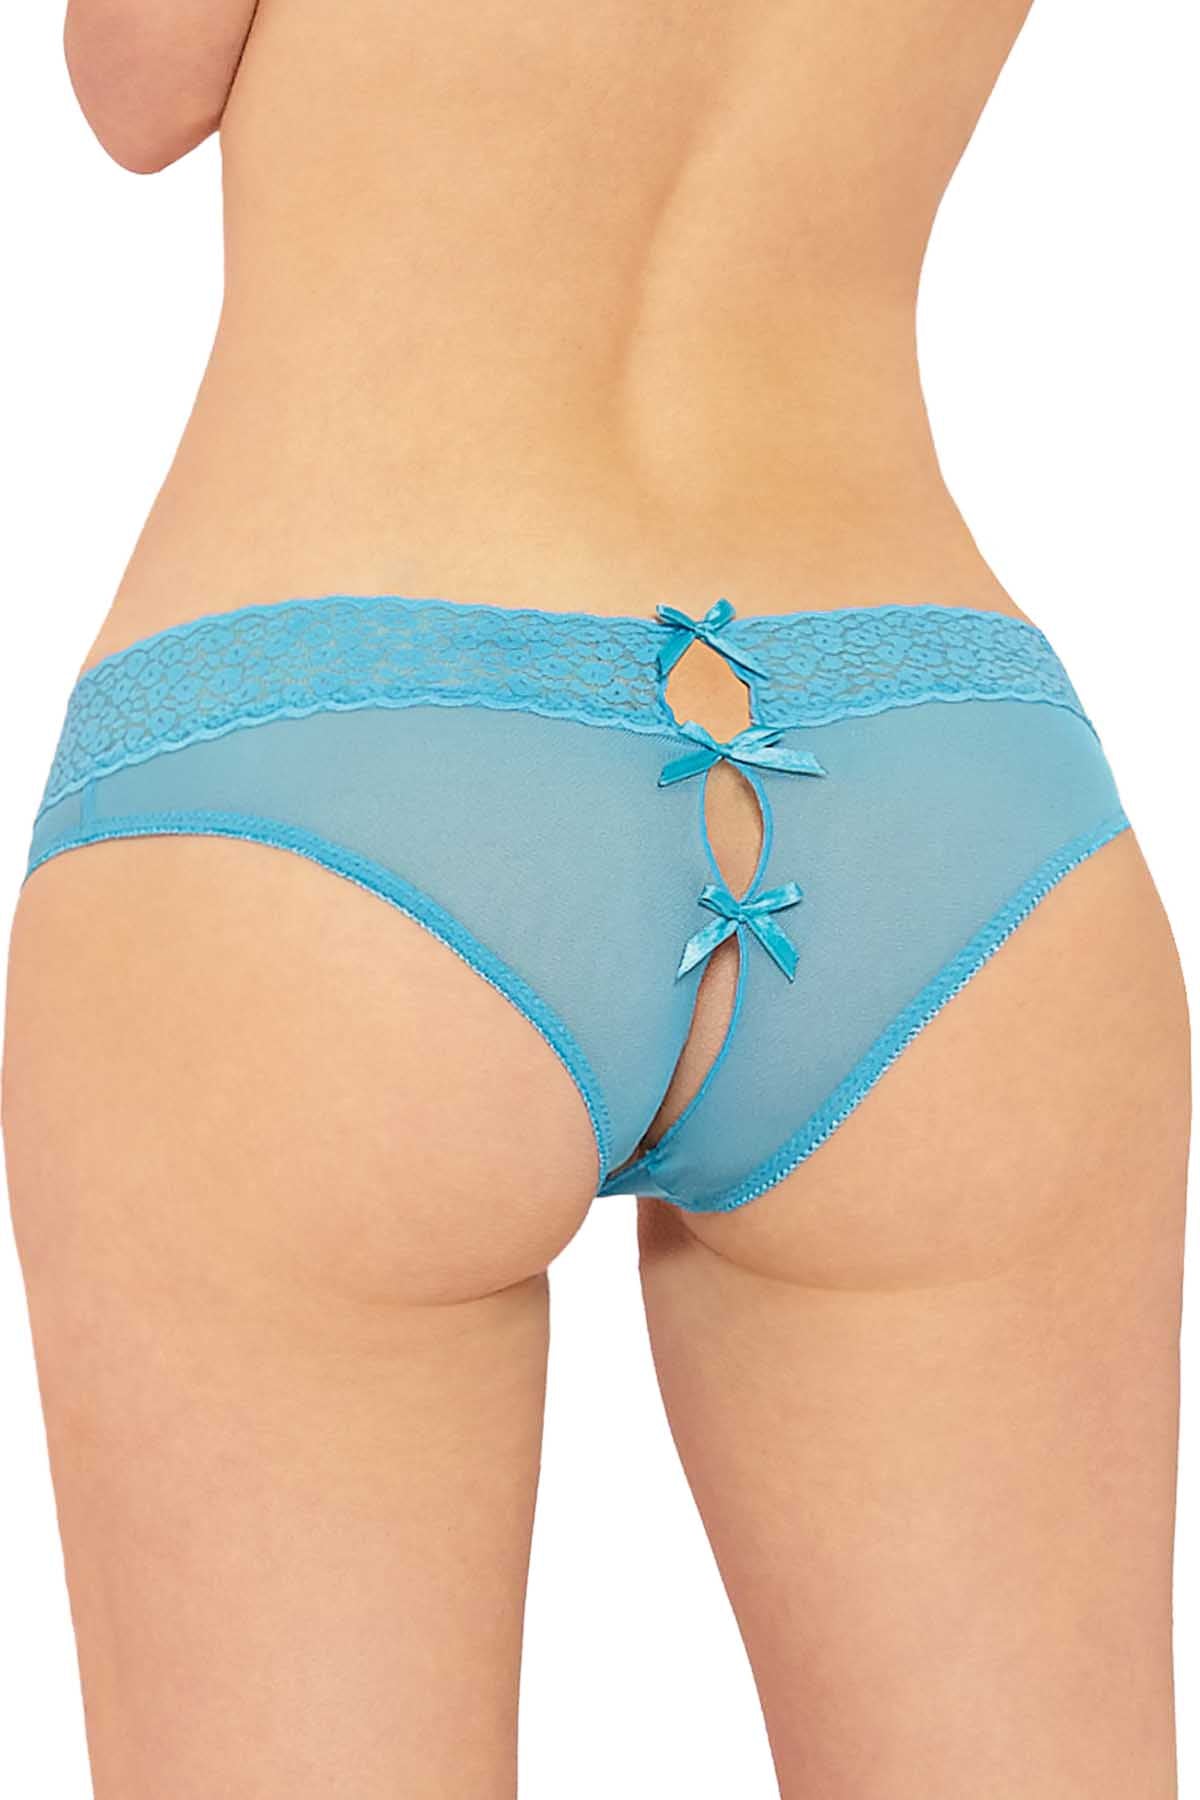 Seven 'Til Midnight Turquoise Leopard Lace Panty